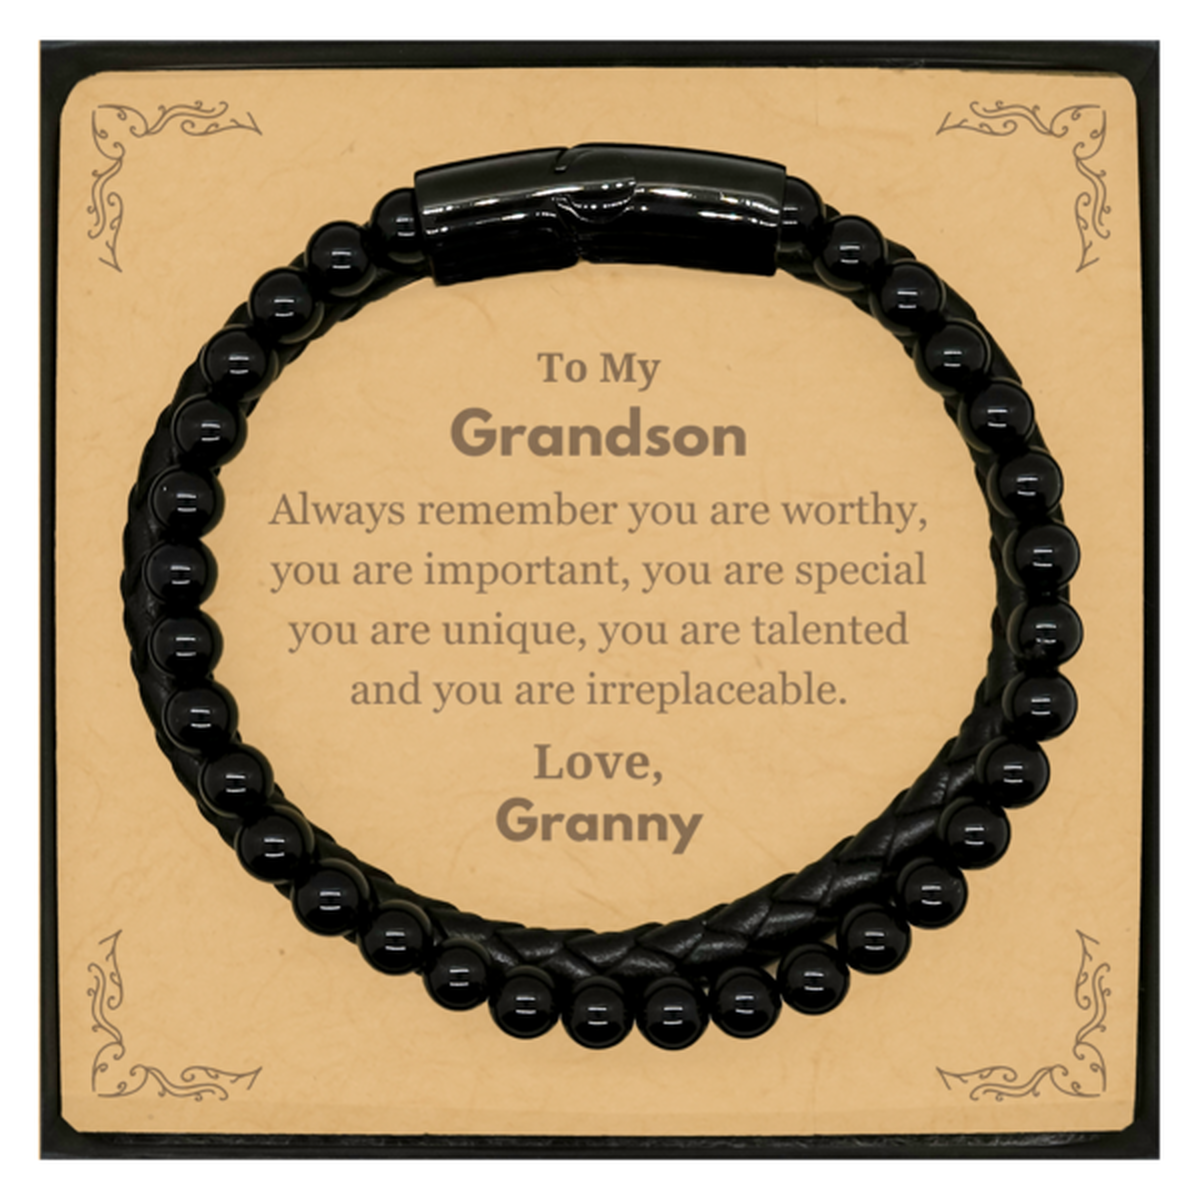 Grandson Birthday Gifts from Granny, Inspirational Stone Leather Bracelets for Grandson Christmas Graduation Gifts for Grandson Always remember you are worthy, you are important. Love, Granny